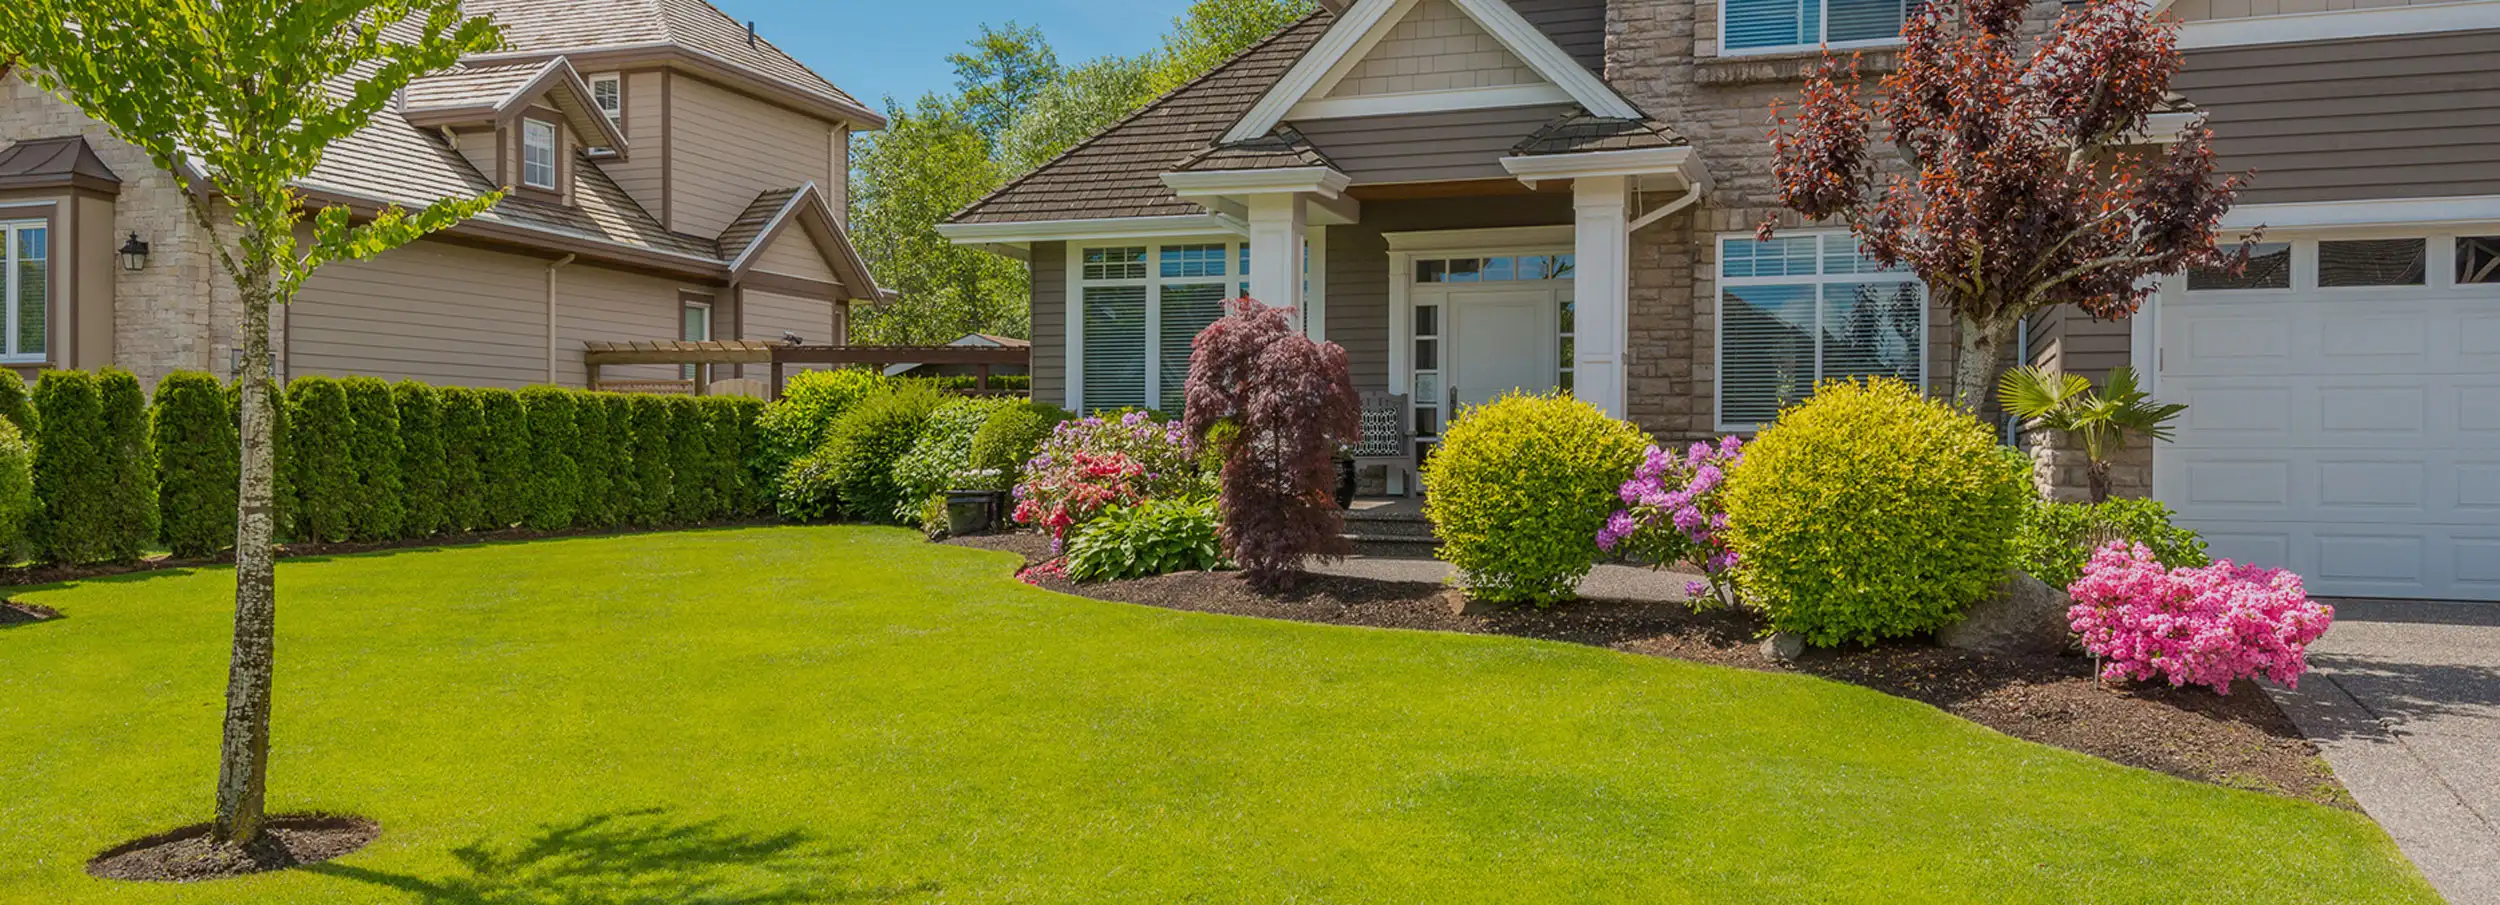 Large home with well-manicured lawn and bushes lining path to front door.